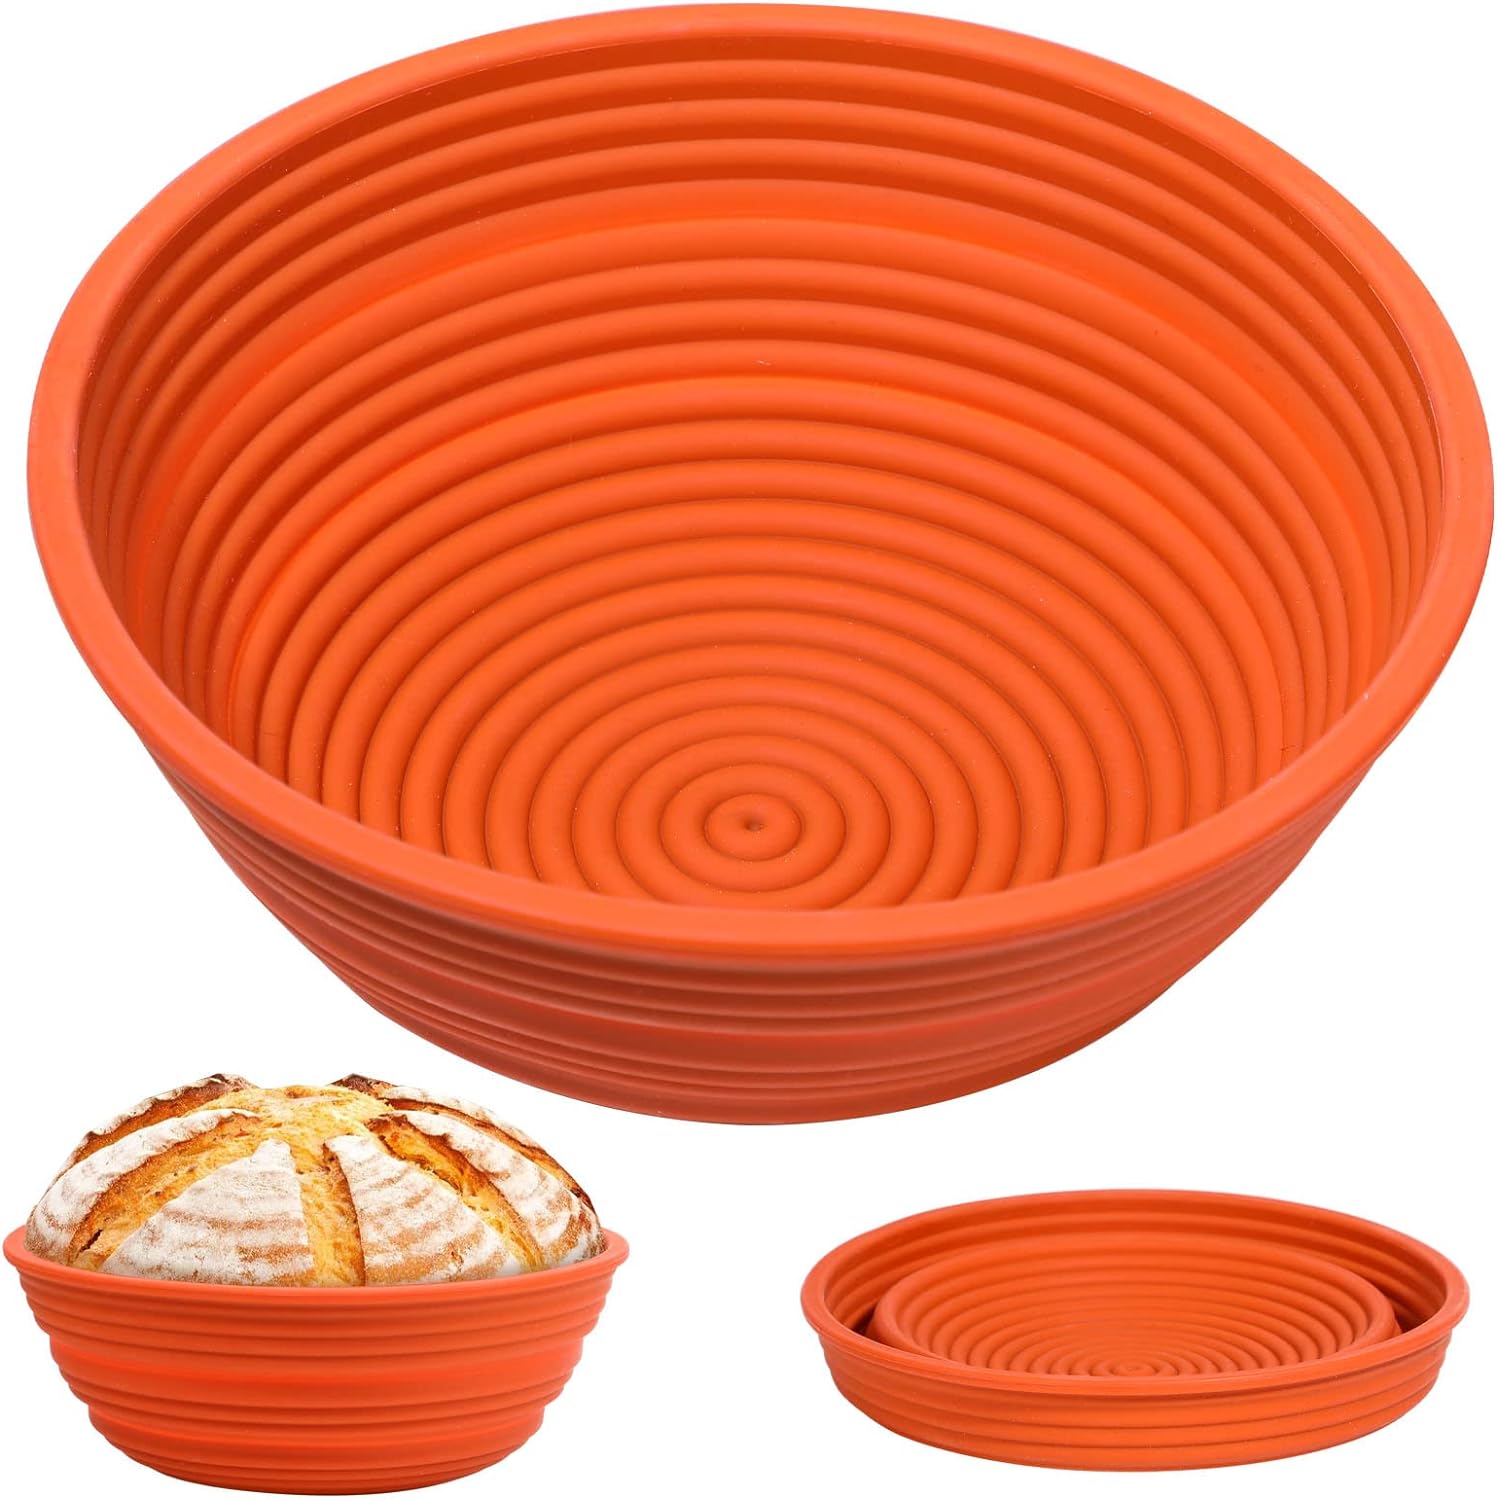 Webake Oval Bread Proofing Basket Silicone, 10 Inches Collapsible